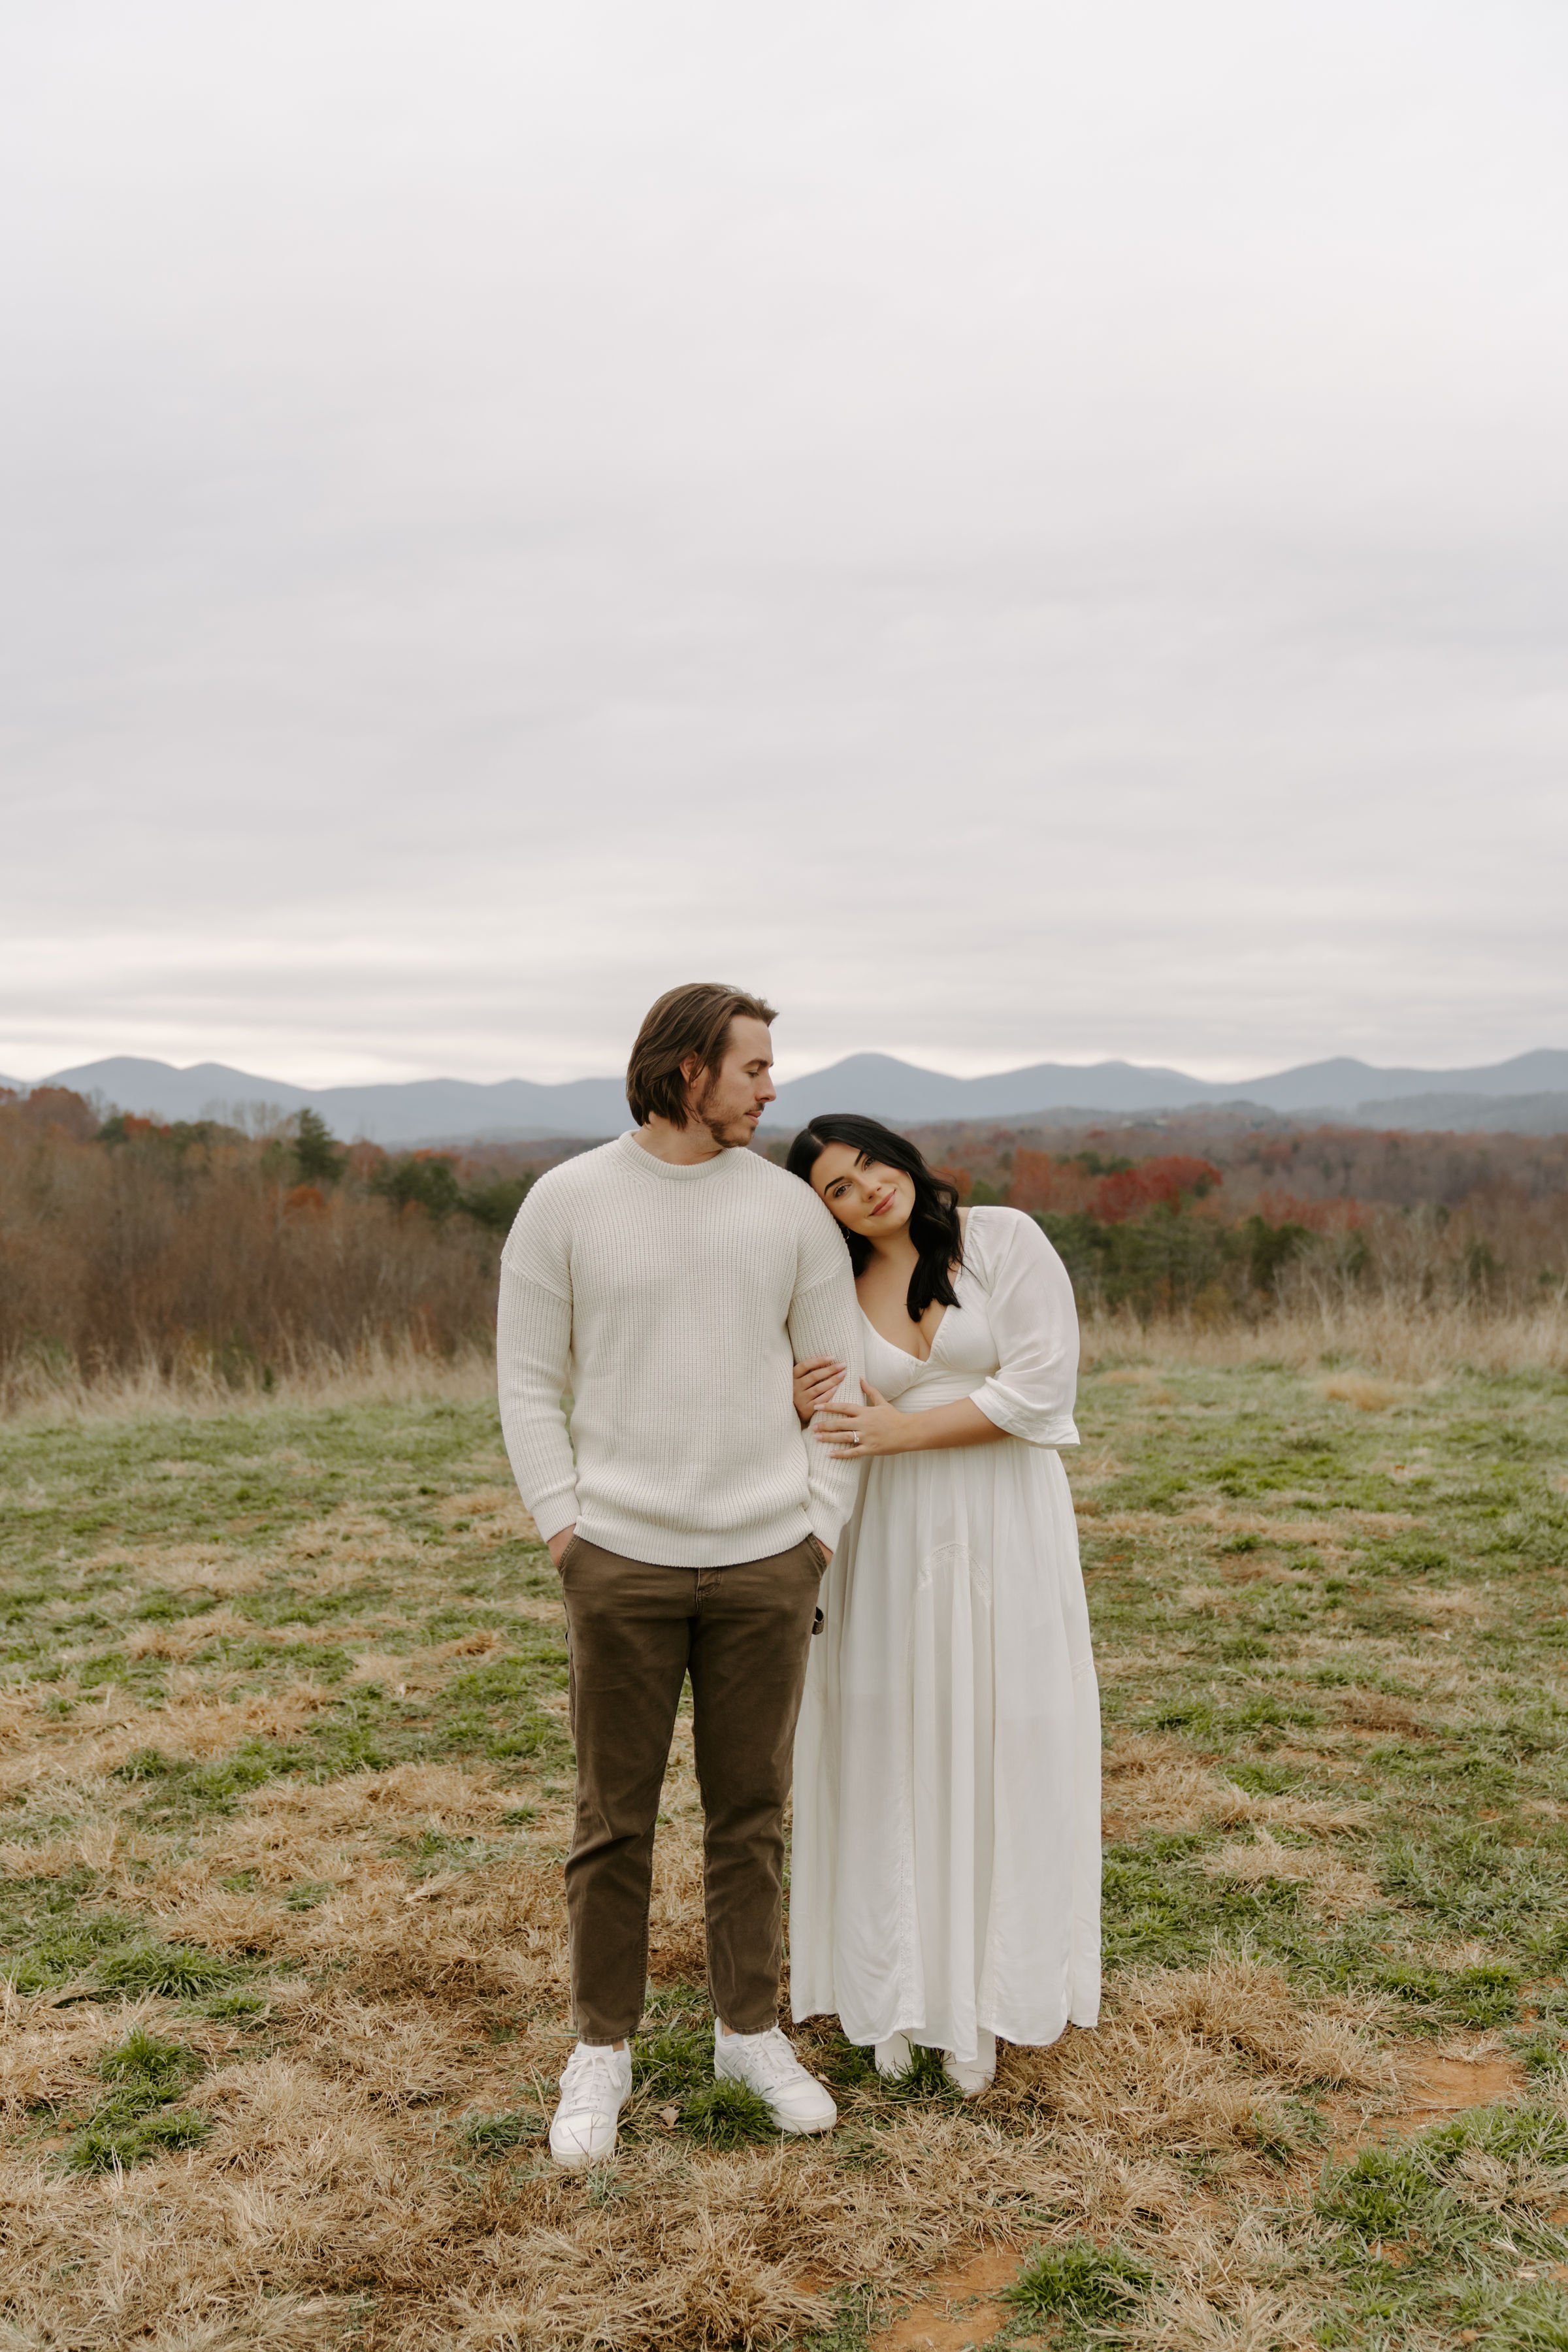 How To Make The Most Of Your Engagement Session | Georgia Wedding Photographer3.jpg